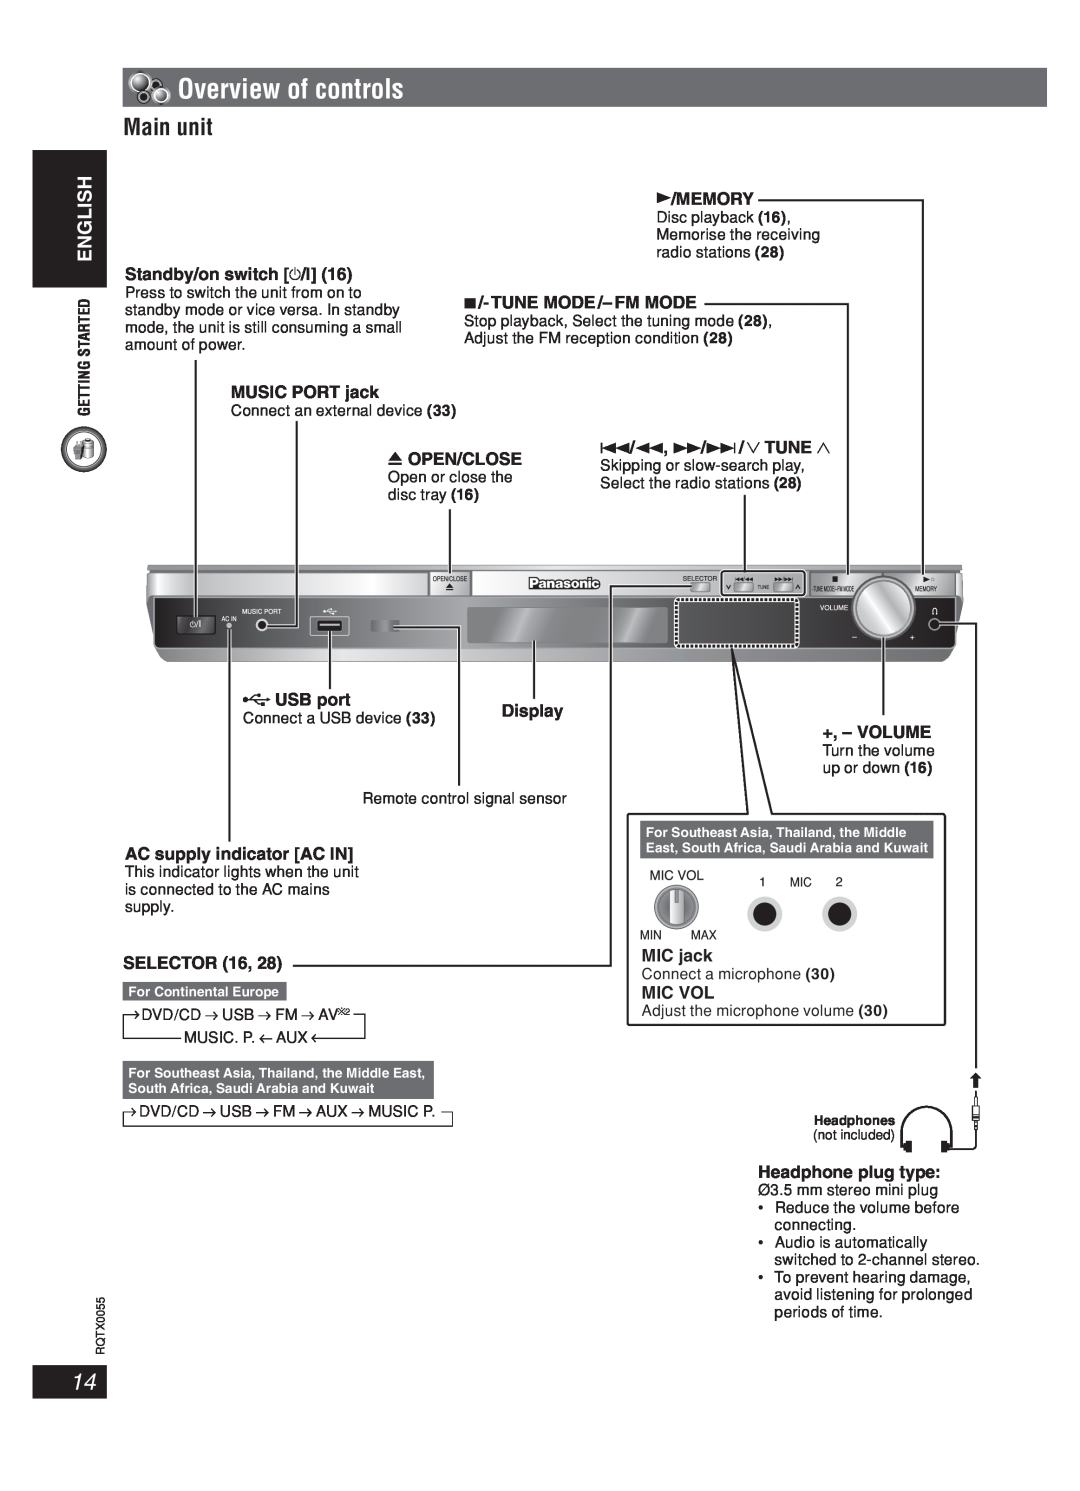 Panasonic SC-PT 250 Overview of controls, Main unit, Standby/on switch y/I, 3/MEMORY, 7/- TUNE MODE /- FM MODE, Open/Close 